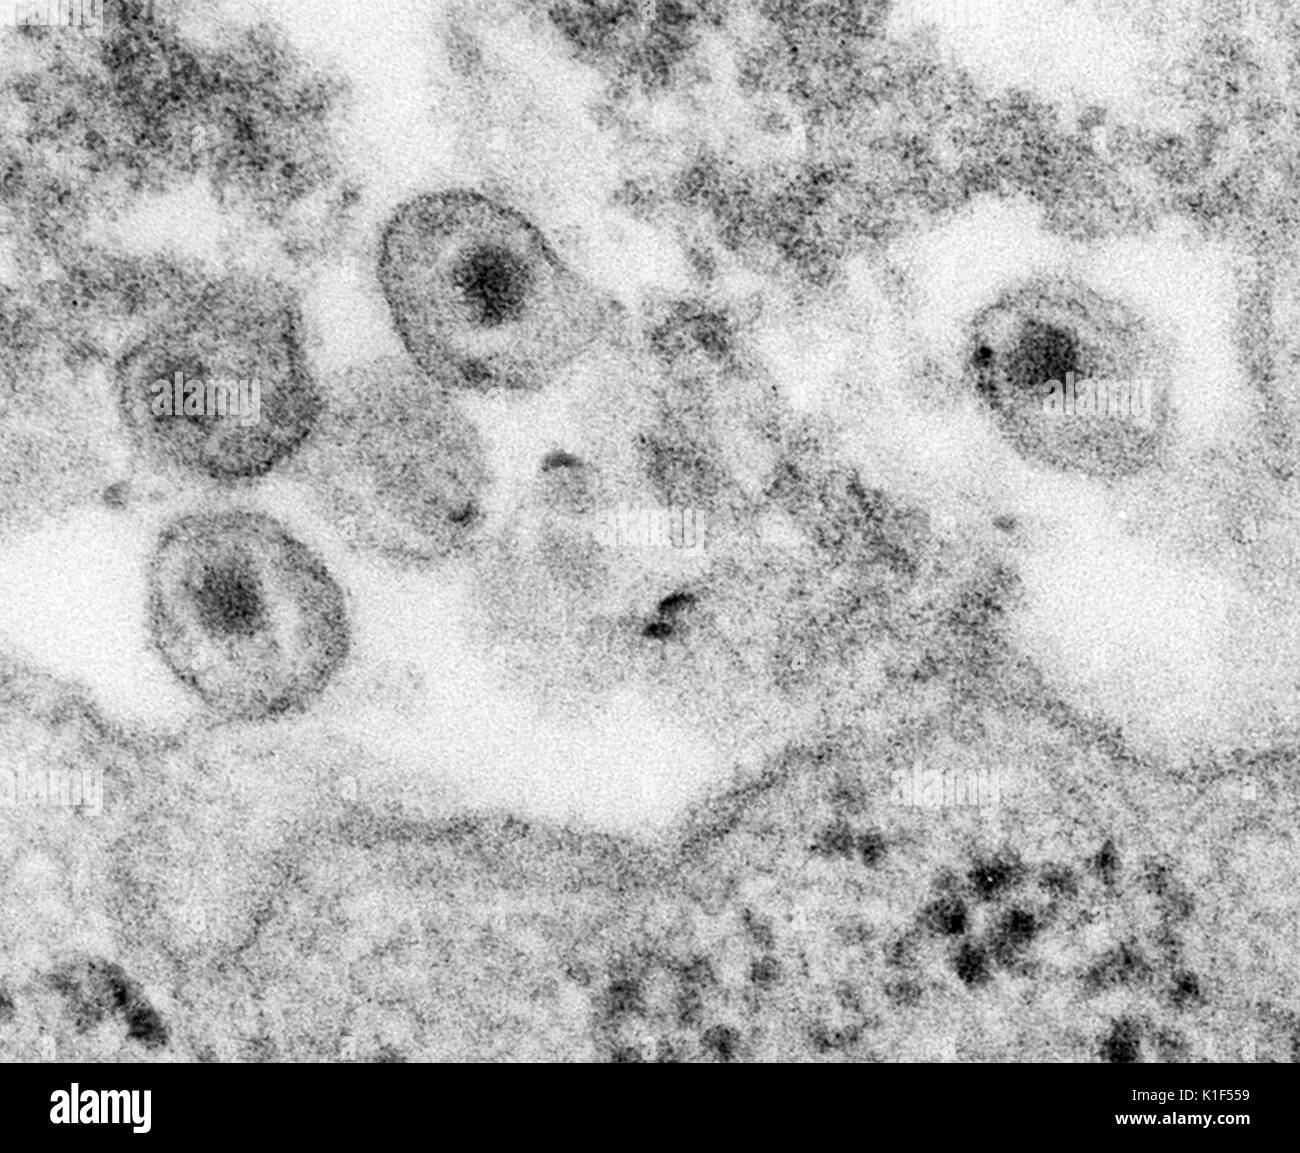 Transmission electron micrograph (TEM), human immunodeficiency virus (HIV), co-cultivated with human lymphocytes. Image courtesy CDC/A. Harrison, P. Feorino, E. L. Palmer, 1984. Stock Photo